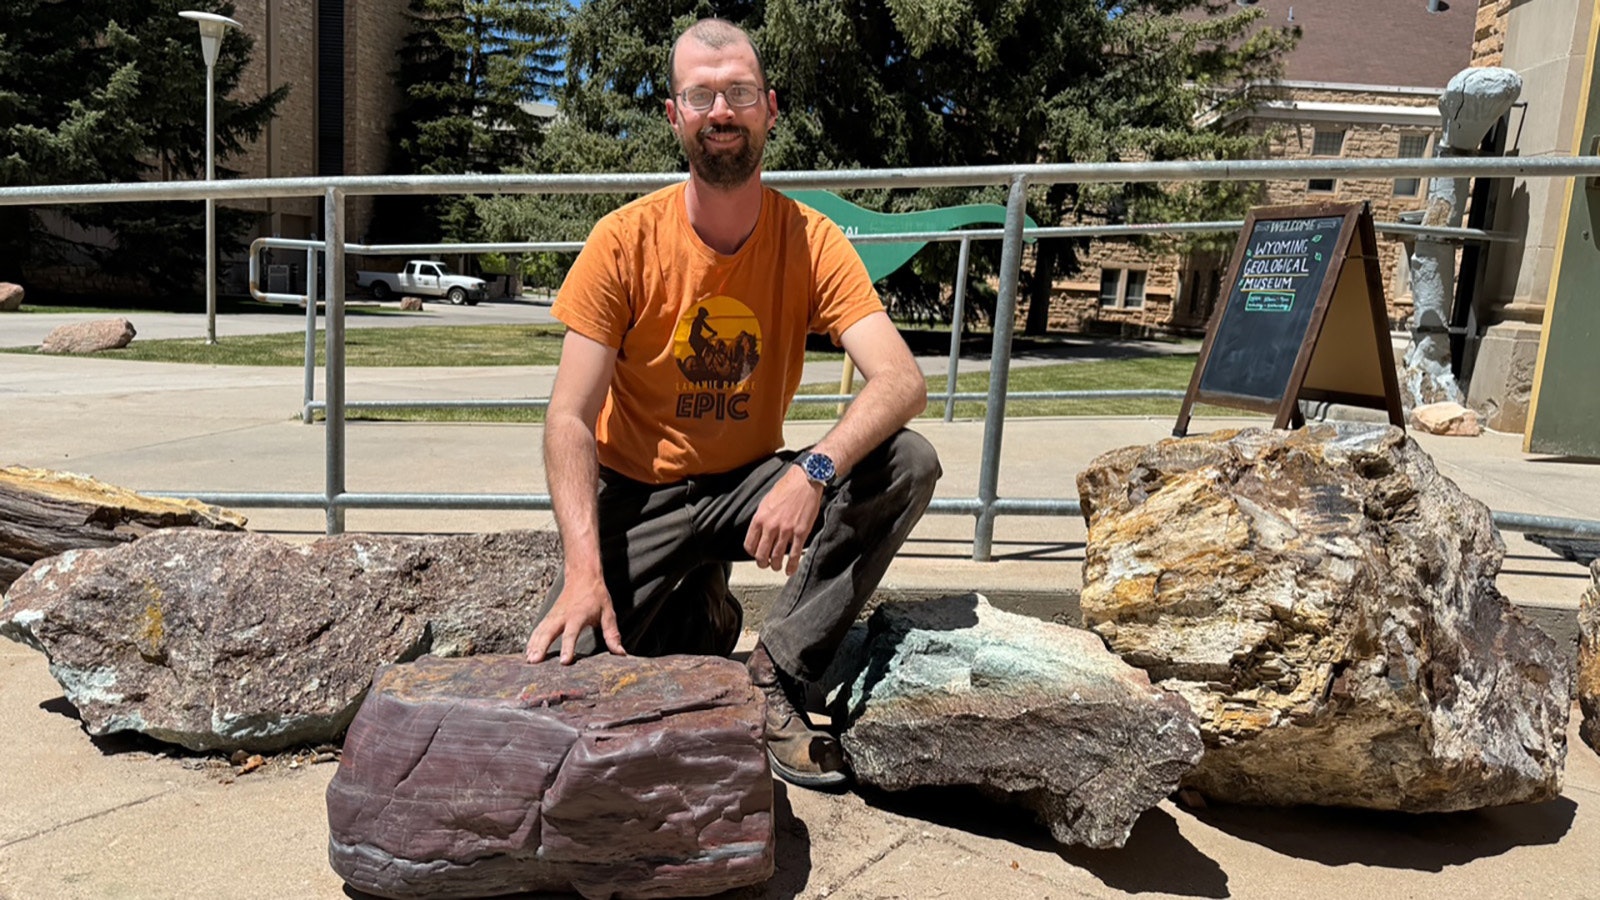 This huge chunk of banded iron rock is a one-of-a-kind Wyoming discovery by Laramie resident Patrick Corcoran and his daughter, Cora. It's now on display at the University of Wyoming Geological Museum.